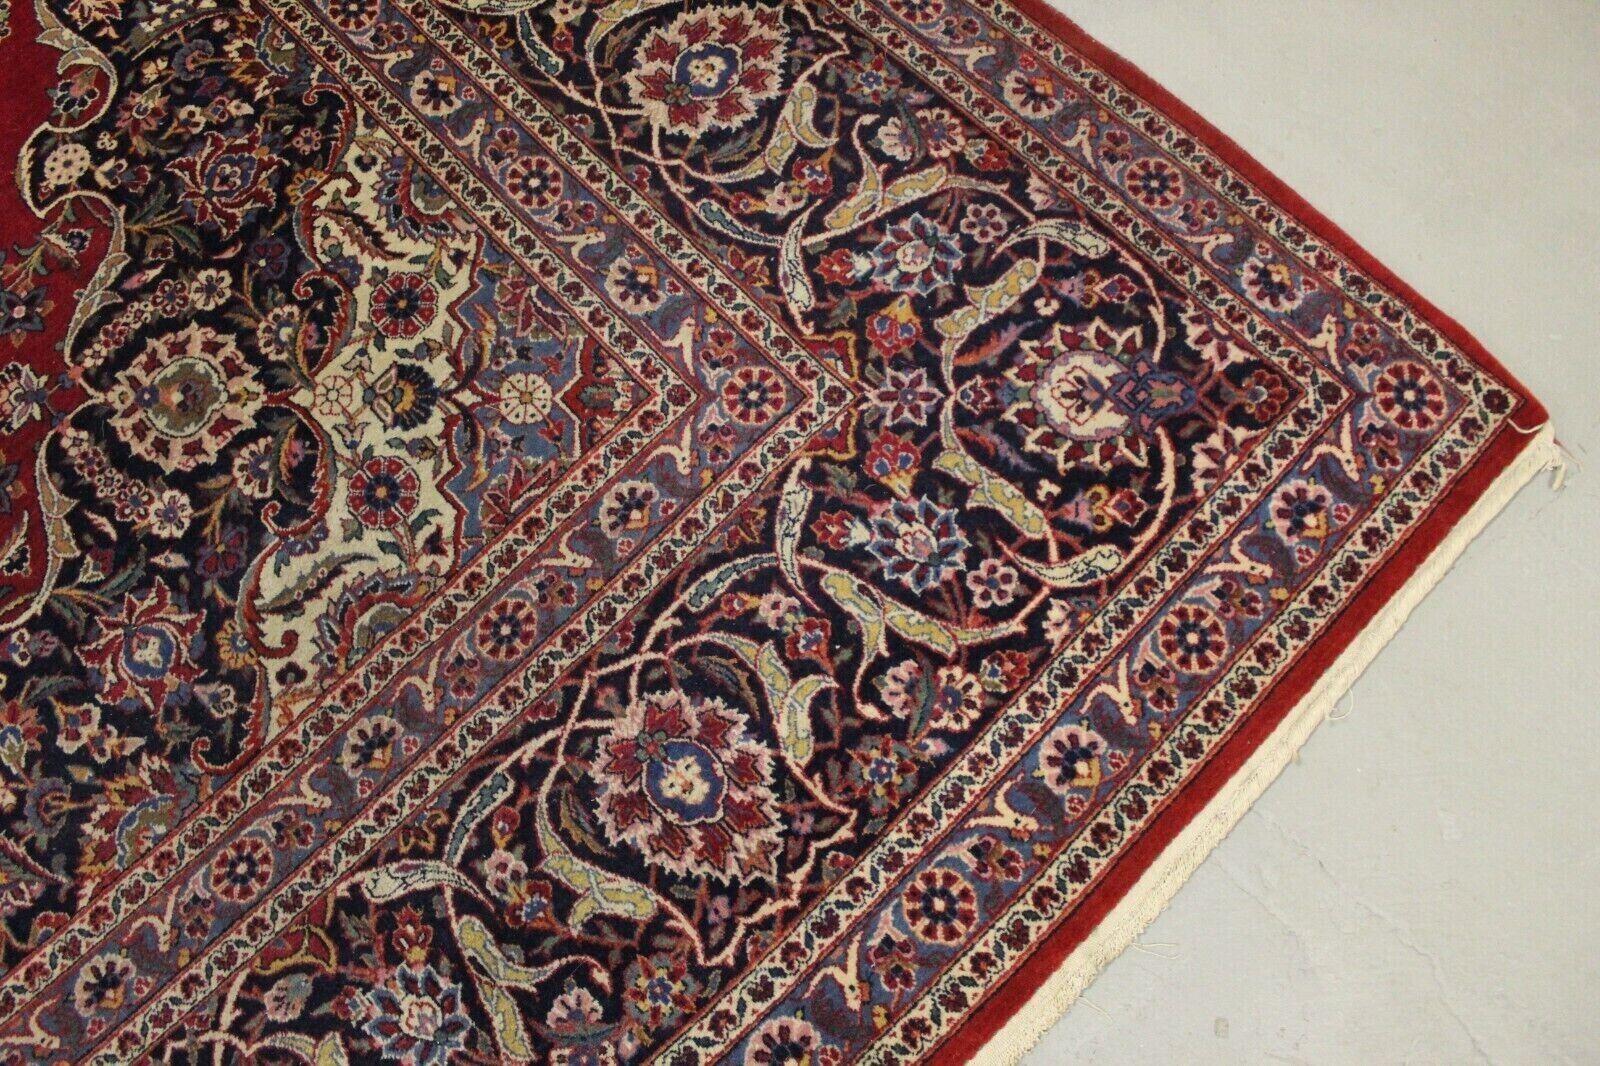 Mid-20th Century Handmade Vintage Persian Style Kashan Red Rug 10' x 13.6', 1950s - 1K39 For Sale